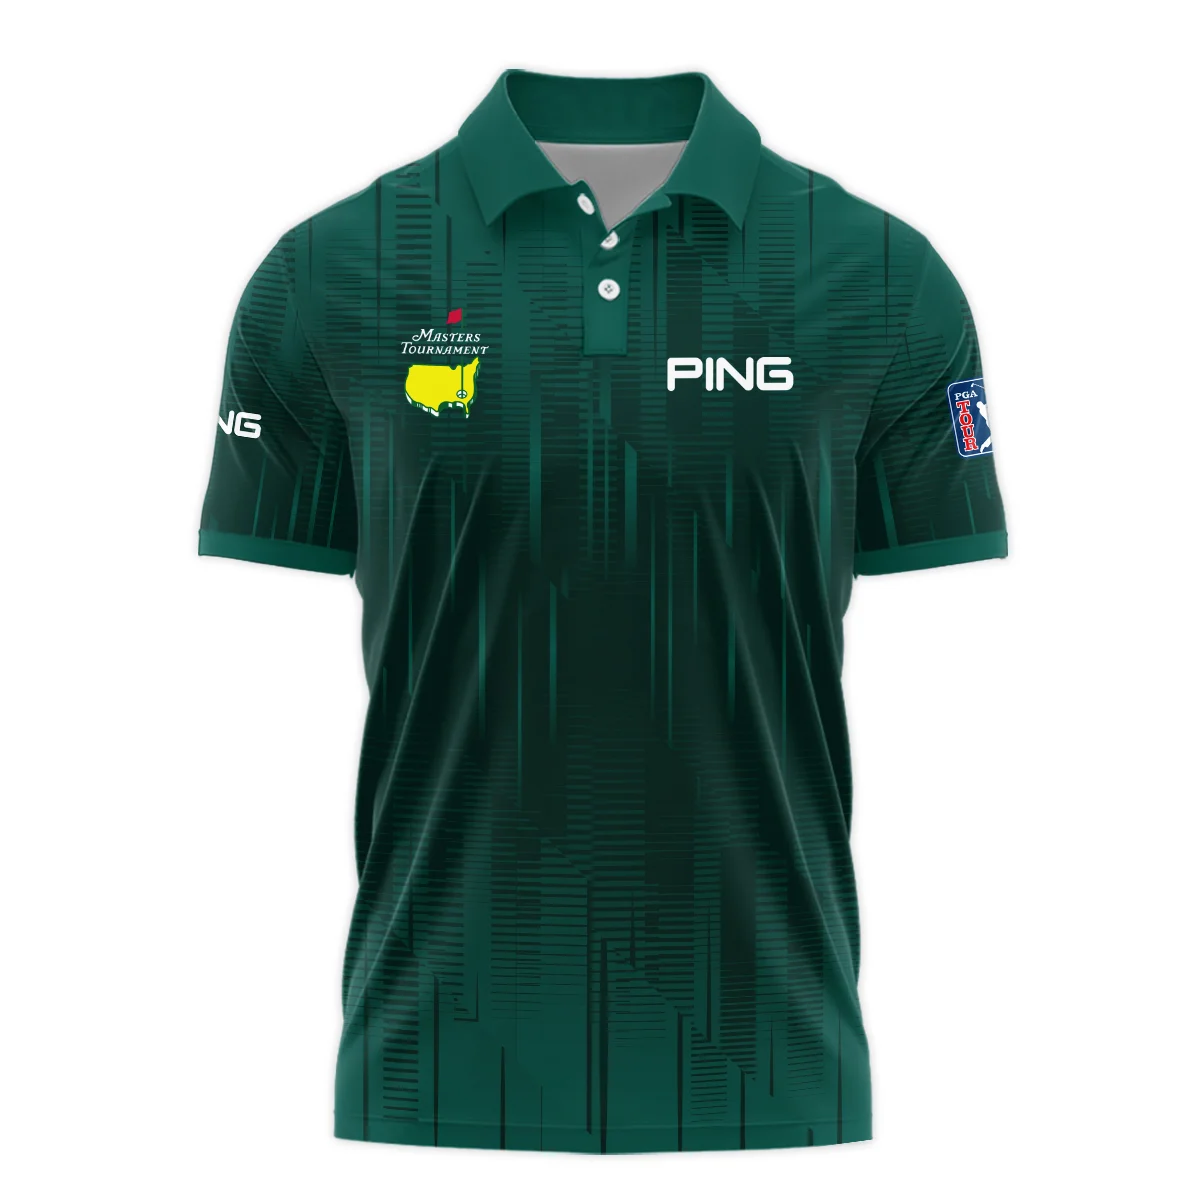 Masters Tournament Ping Dark Green Gradient Stripes Pattern Long Polo Shirt Style Classic Long Polo Shirt For Men